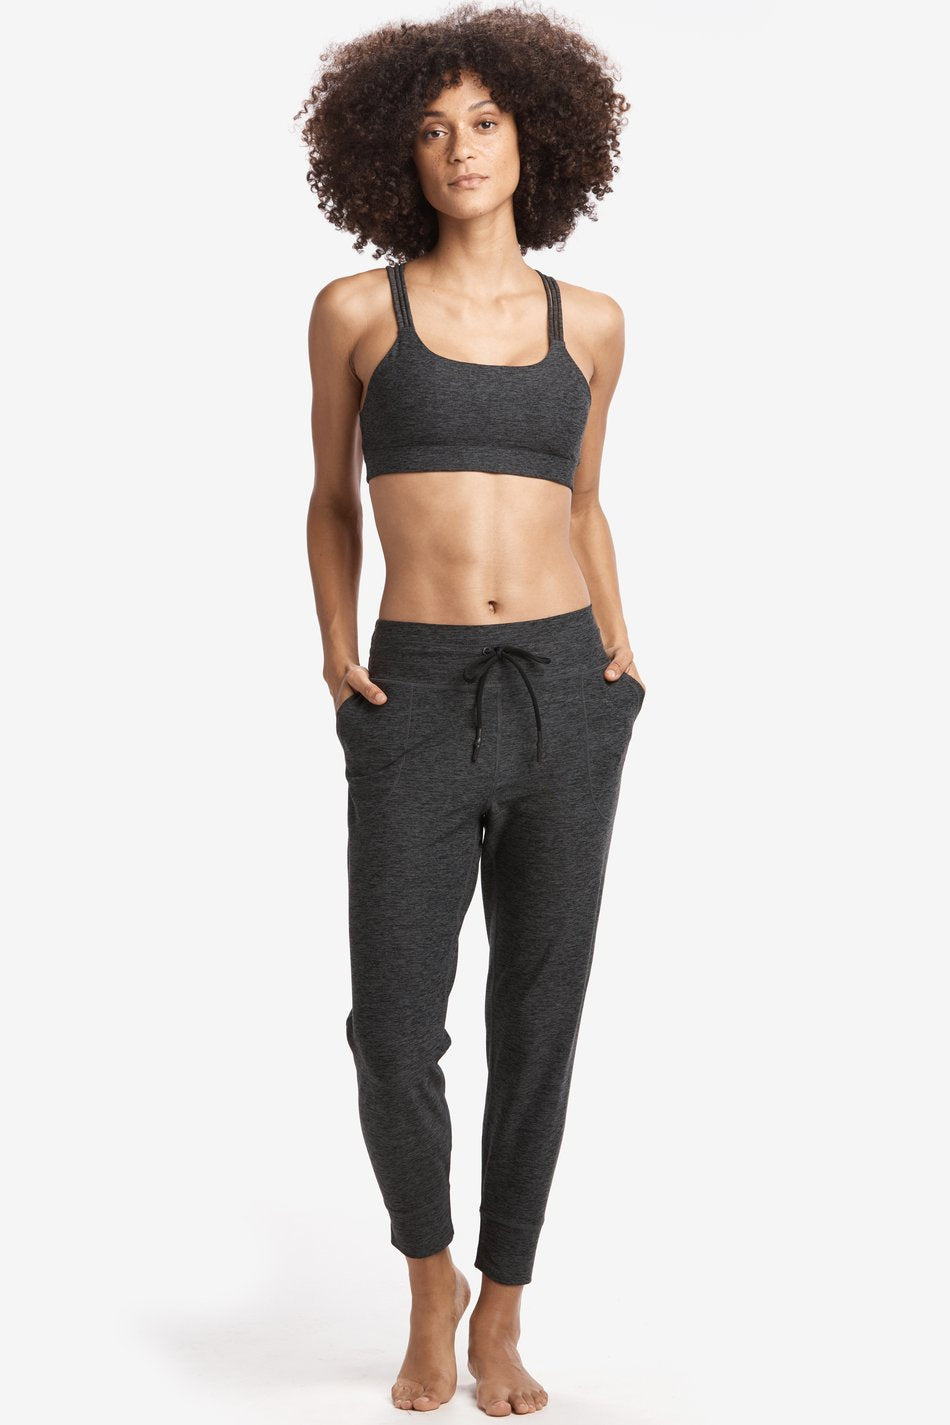 NEW Lole Women's High-Rise Stretch Pant, Lounge Pant, Jogger, Light Grey,  not_nwt - Lole – Buttons & Beans Co.